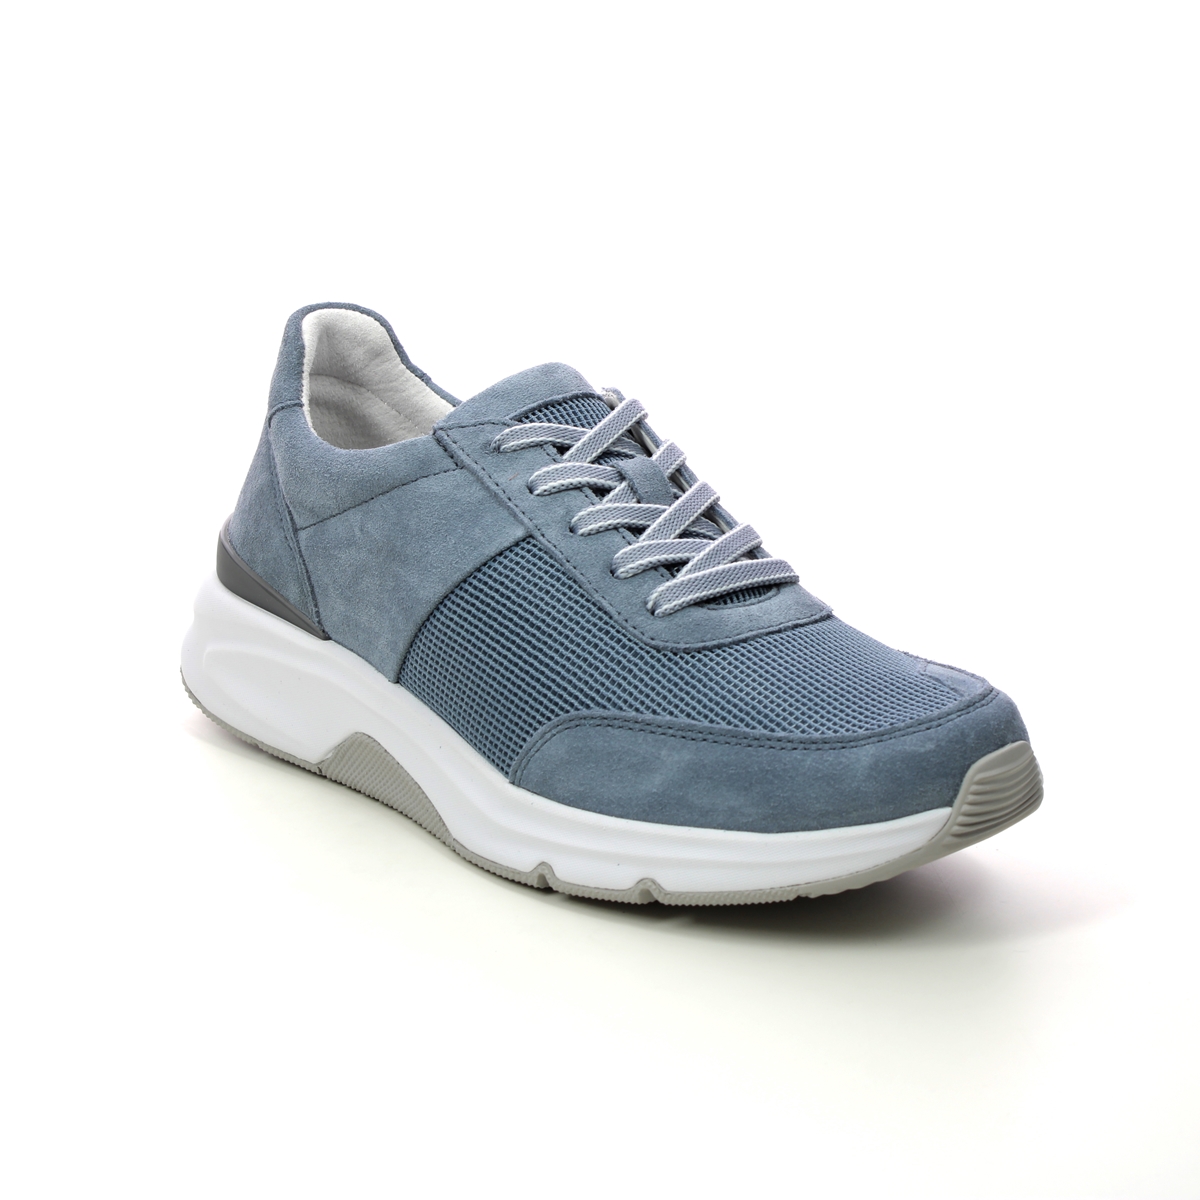 Gabor Aloe Rolling Soft Denim Suede Womens trainers 26.897.26 in a Plain Leather and Textile in Size 7.5